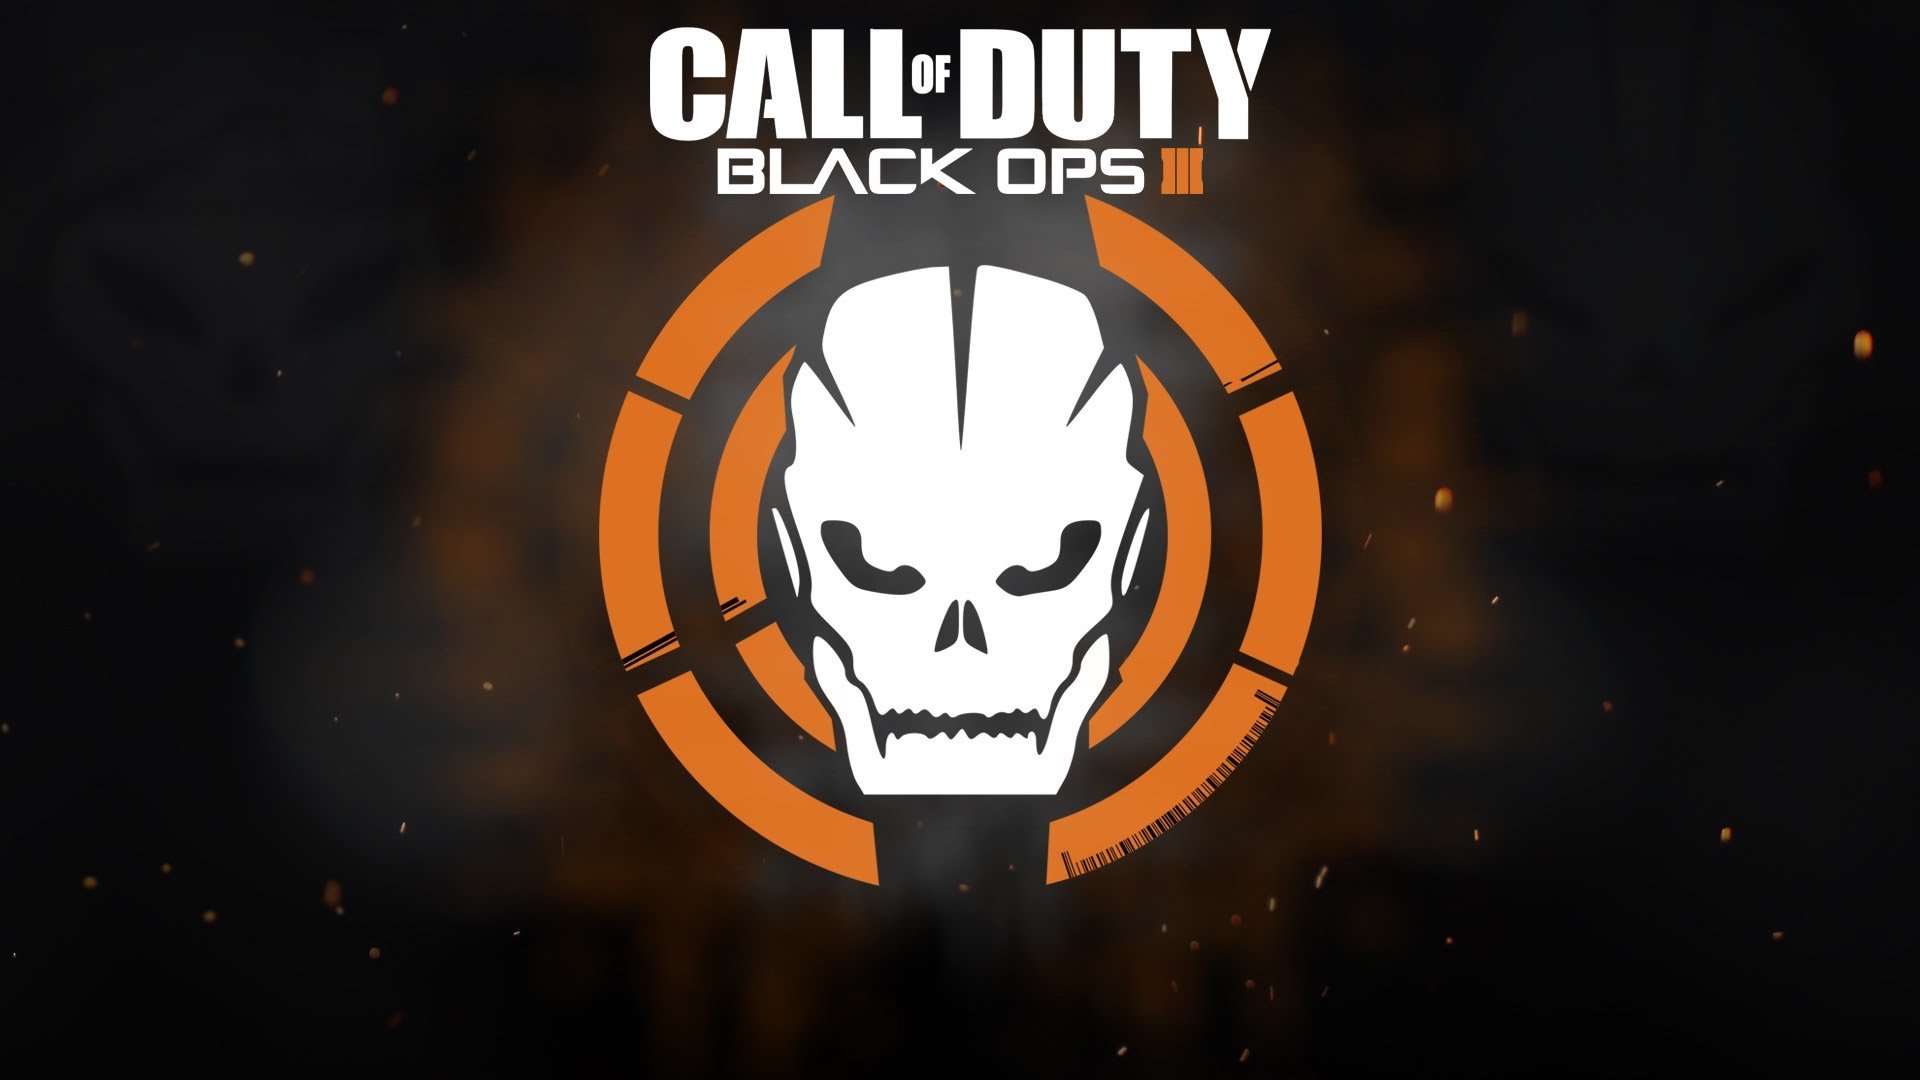 Call Of Duty Black Ops 3 Wallpapers Hd For Desktop Backgrounds